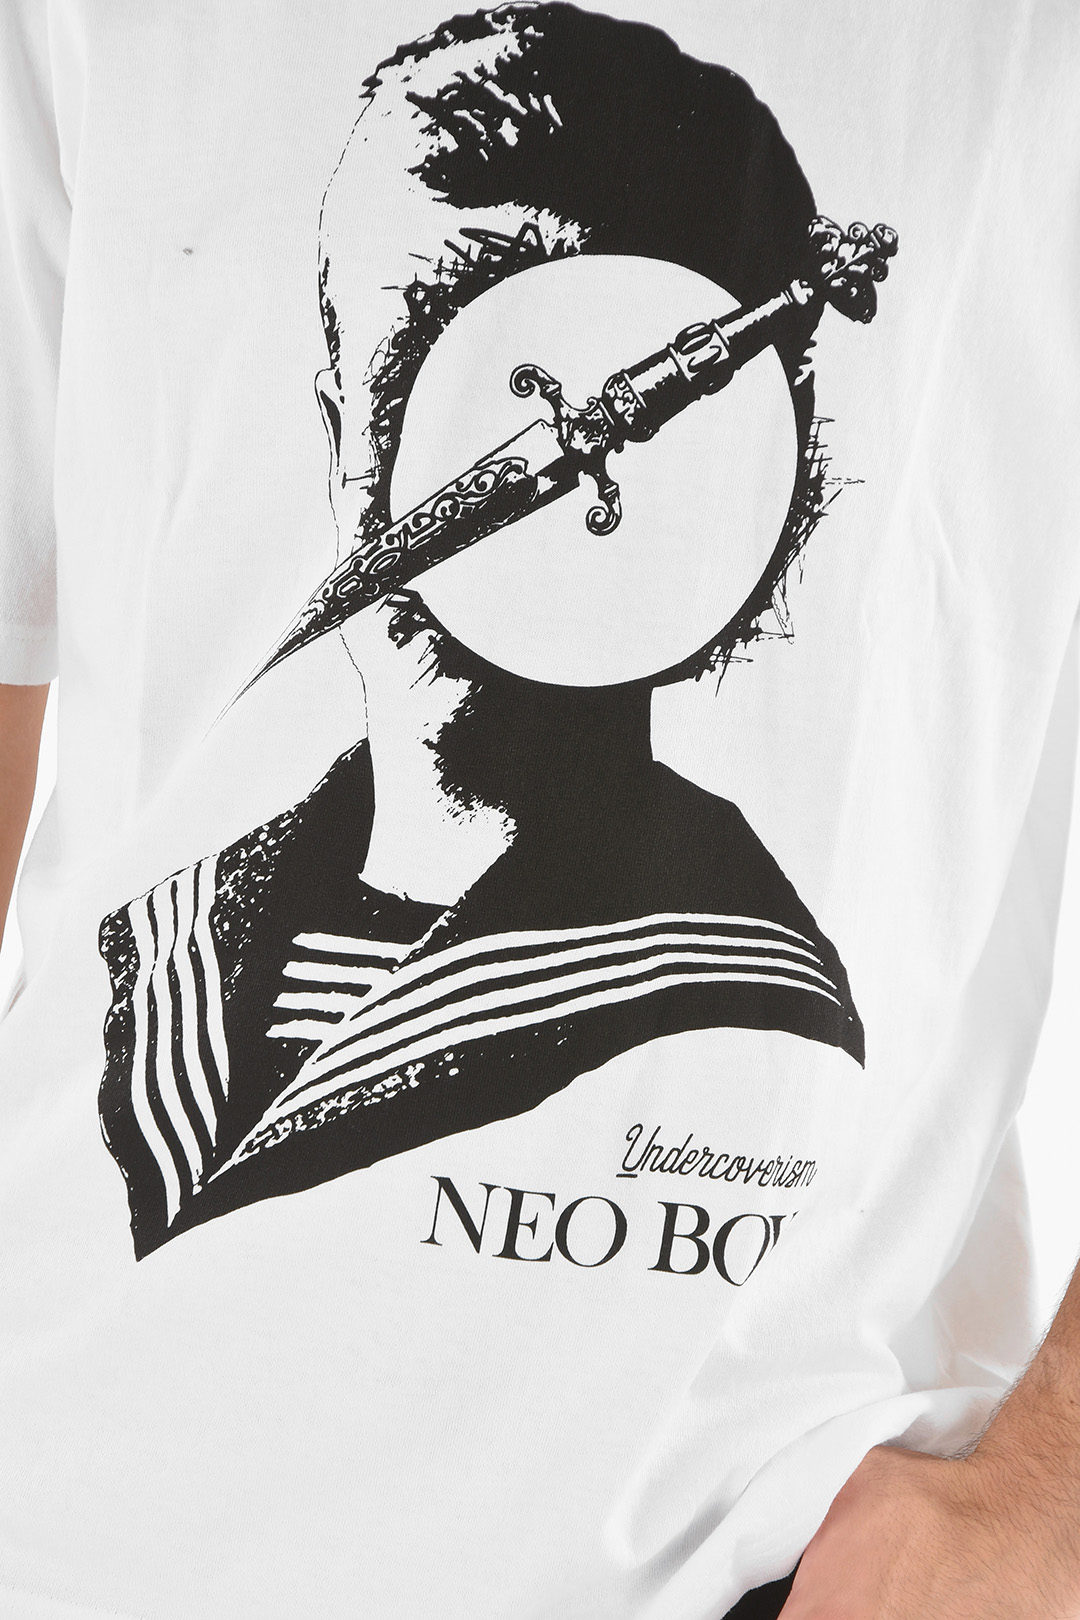 archive 09’s undercover NEO BOY T-shirt